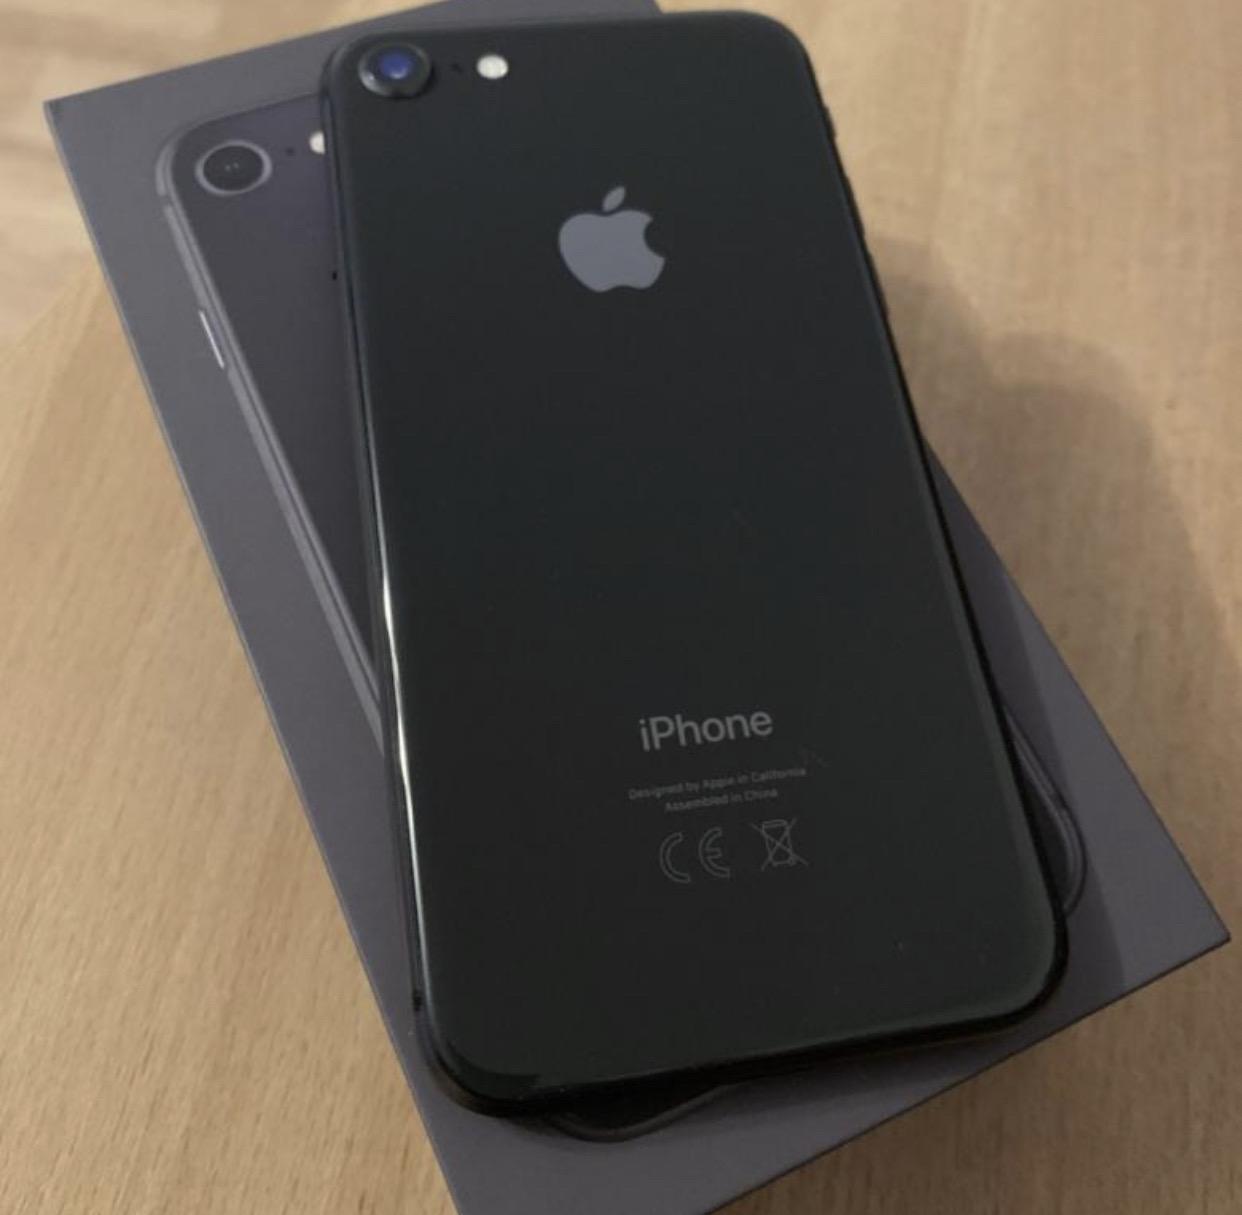 Iphone 8 Space Gray 64gb